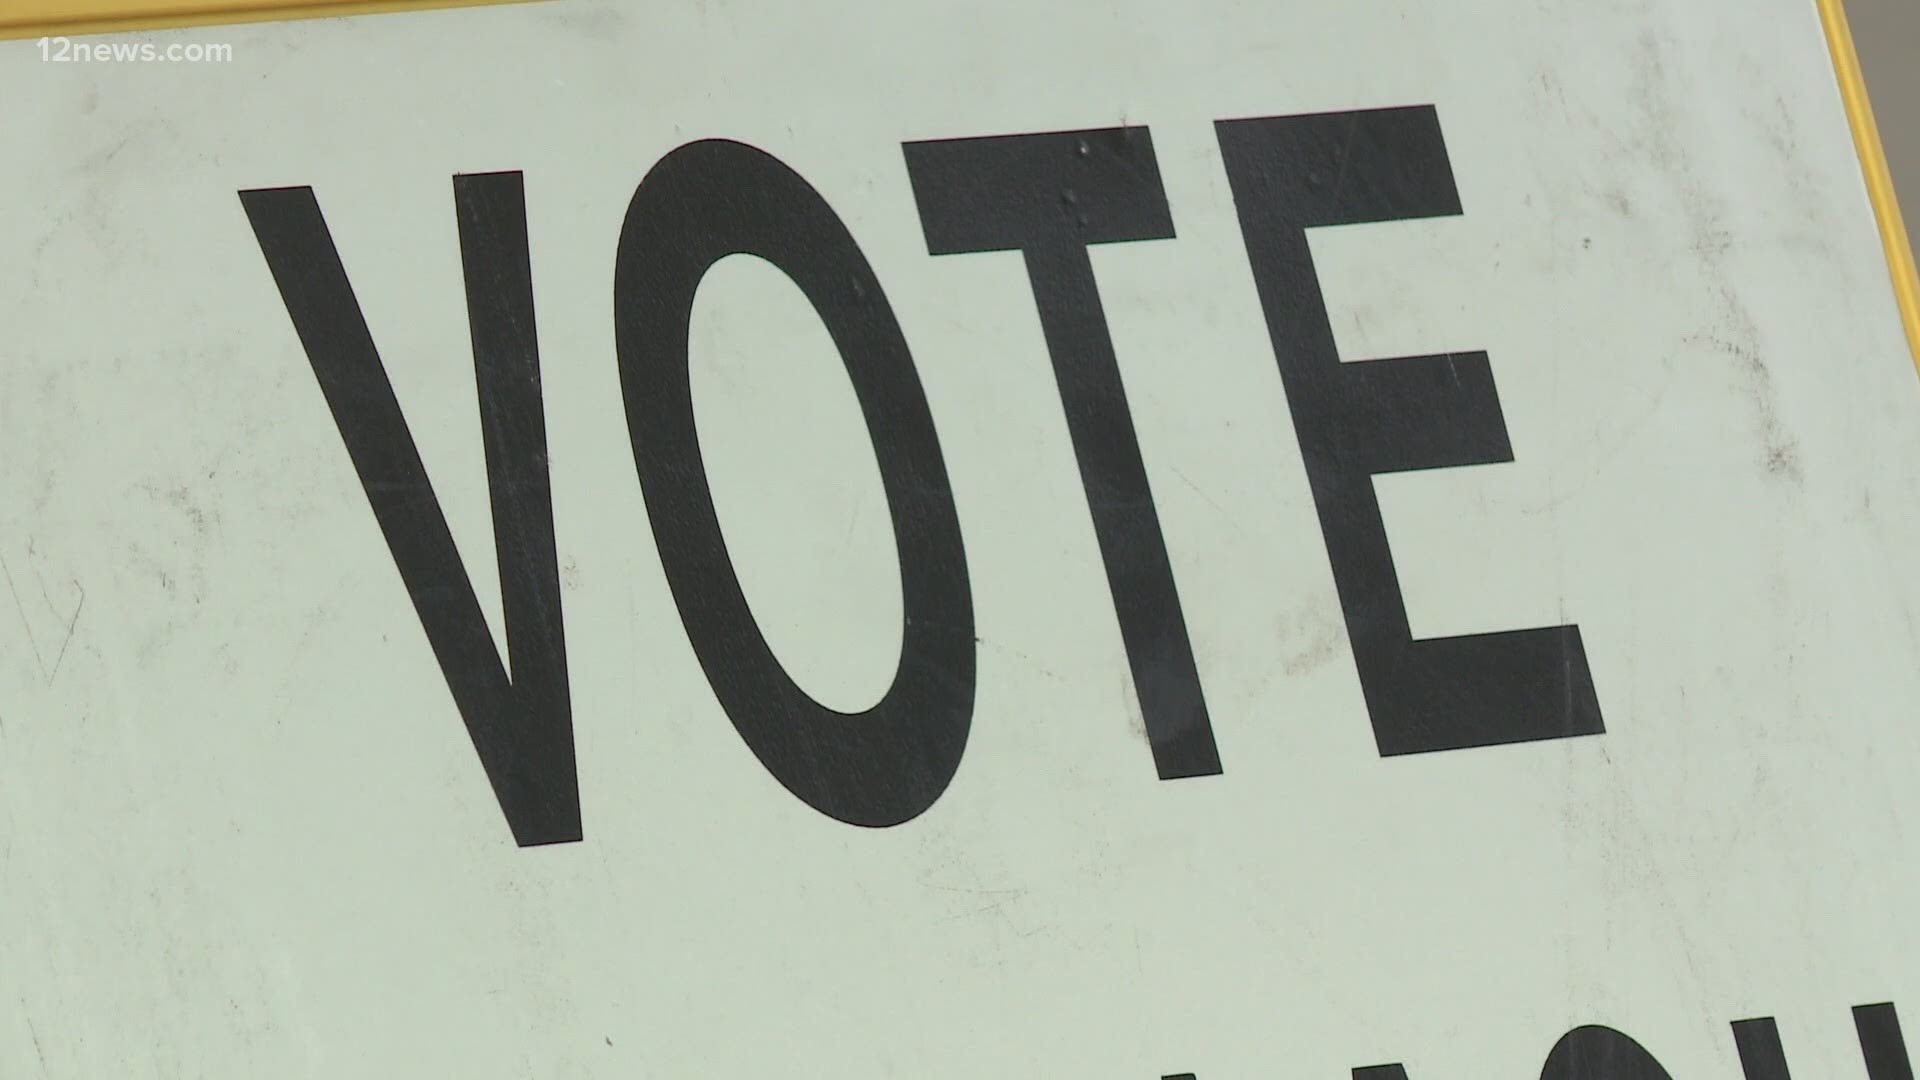 Election Day is about two months away. An unprecedented turnout is expected and Maricopa Co. it working to make sure casting a ballot is safe for everyone.